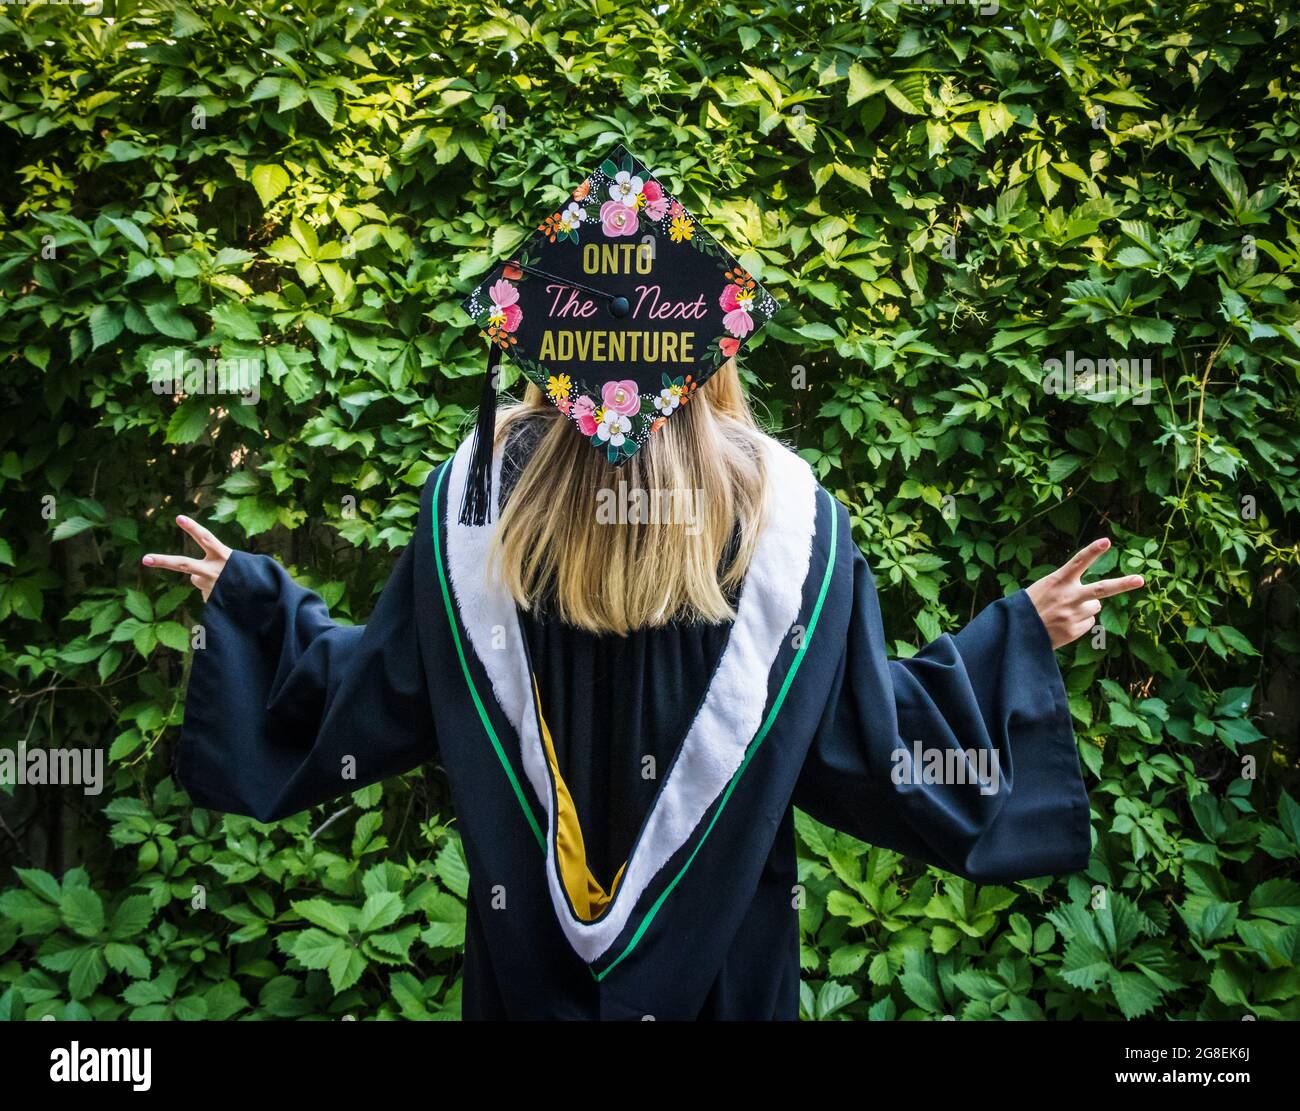 A humorous image of a woman in a convocation cap and gown with her head tilted backwards to show a message on the cap 'Onto the next adventure' Stock Photo